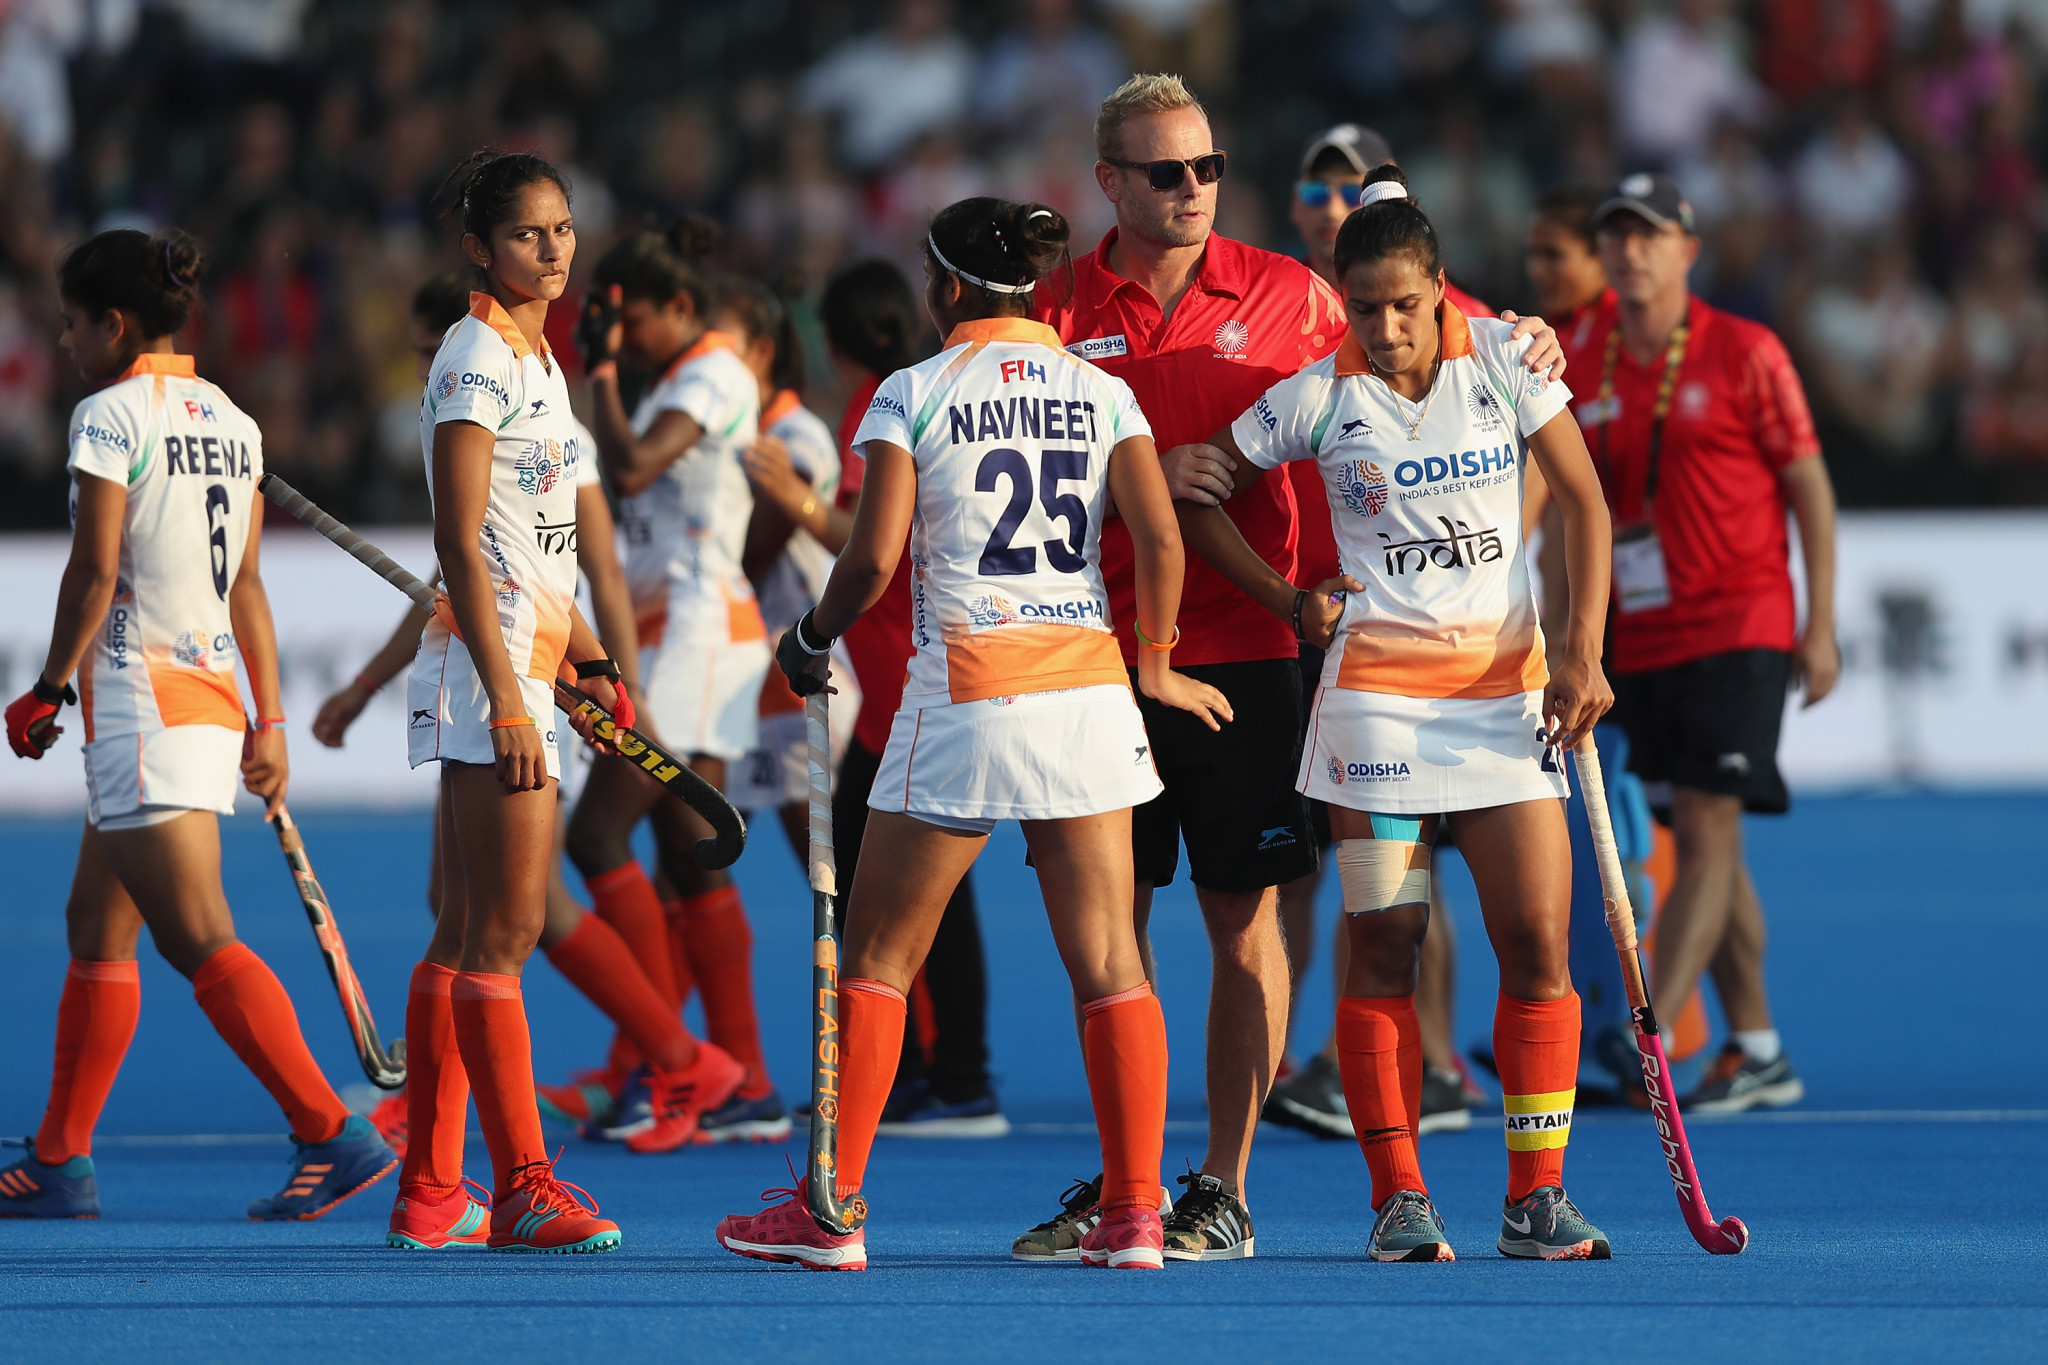 The Indian women's hockey team have been put through their paces in taekwondo sessions ©Getty Images